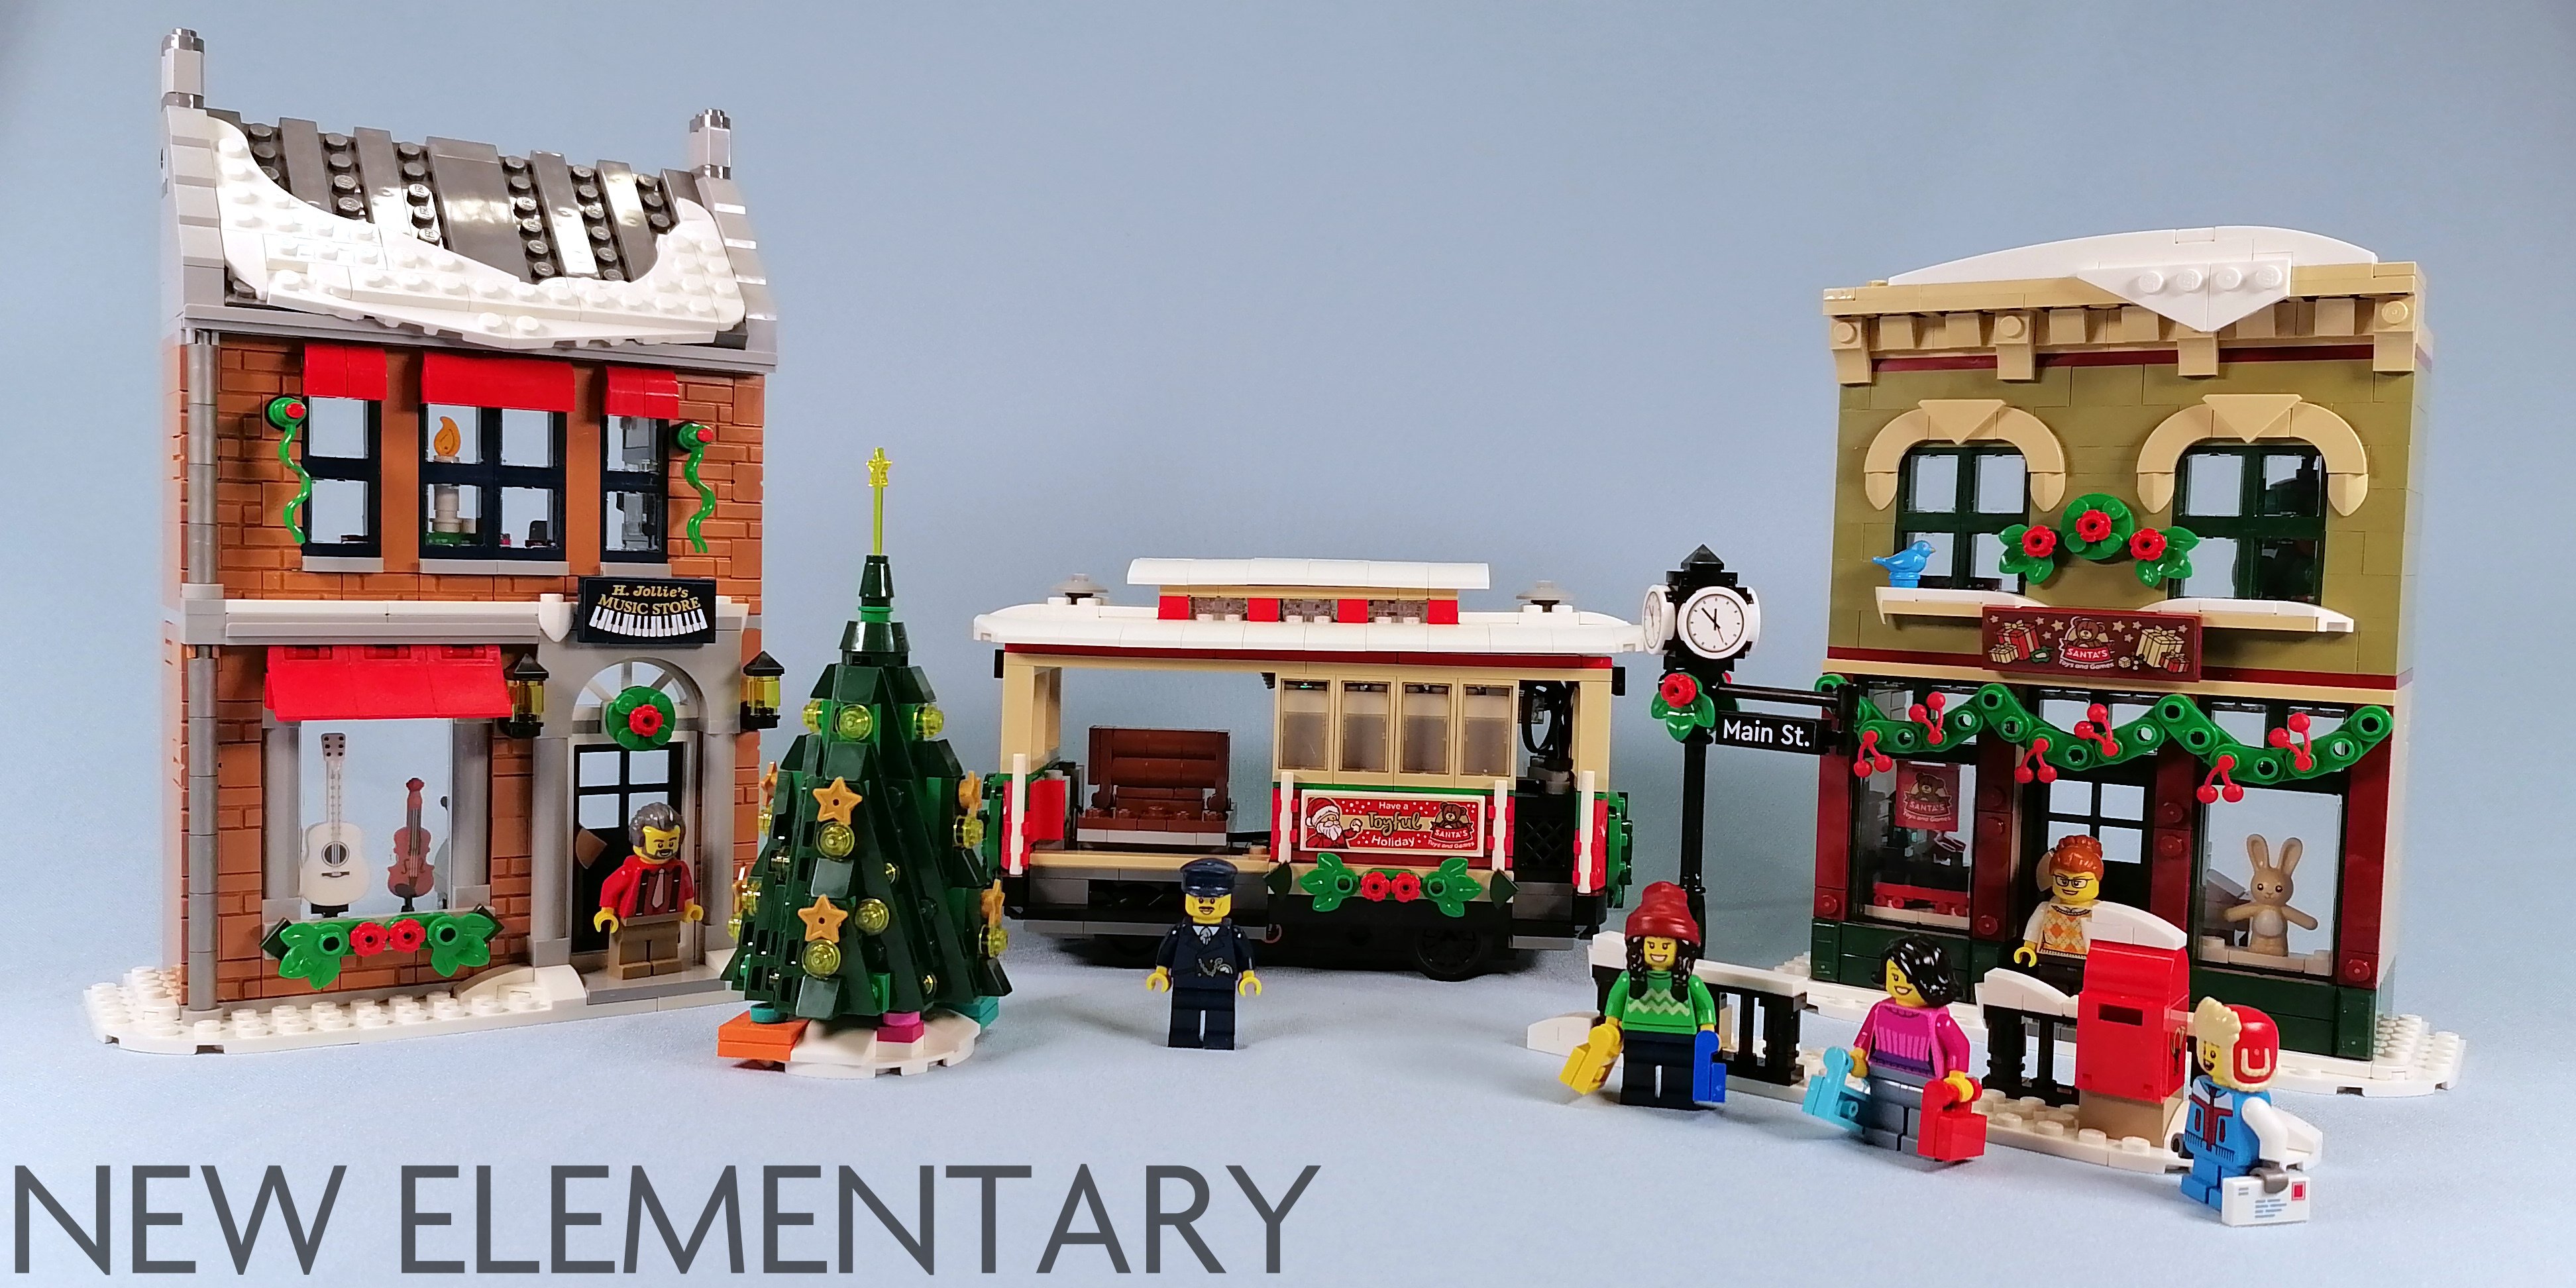 LEGO® Winter Village review: 10308 Holiday Main Street | New Elementary: LEGO® parts, sets techniques